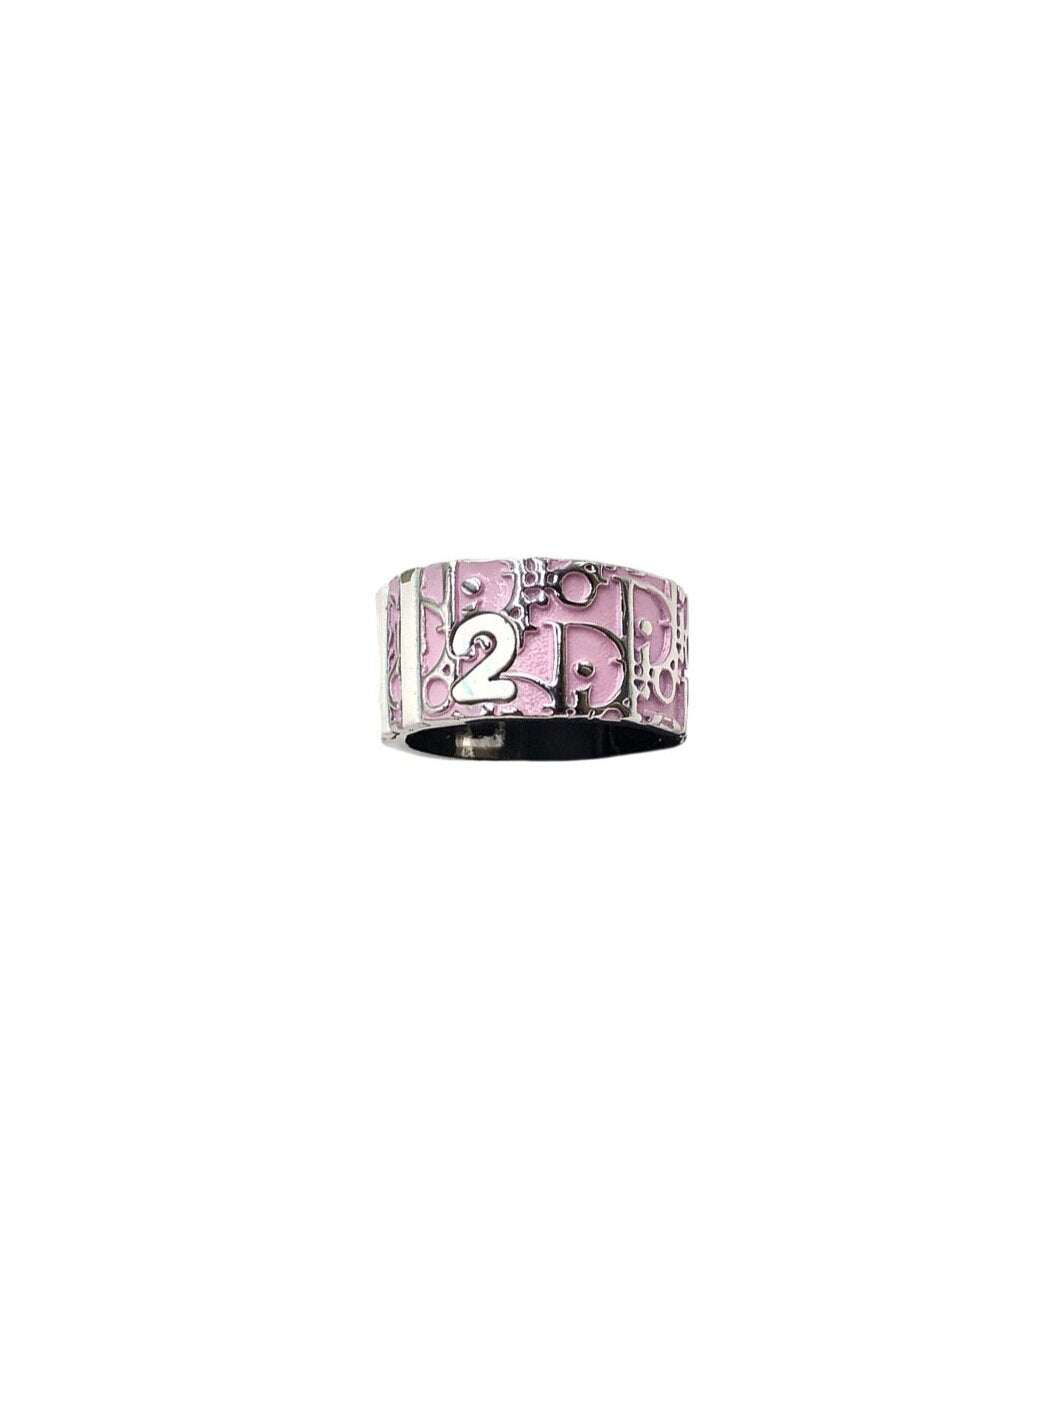 Christian Dior 2000s Pink Trotter Ring